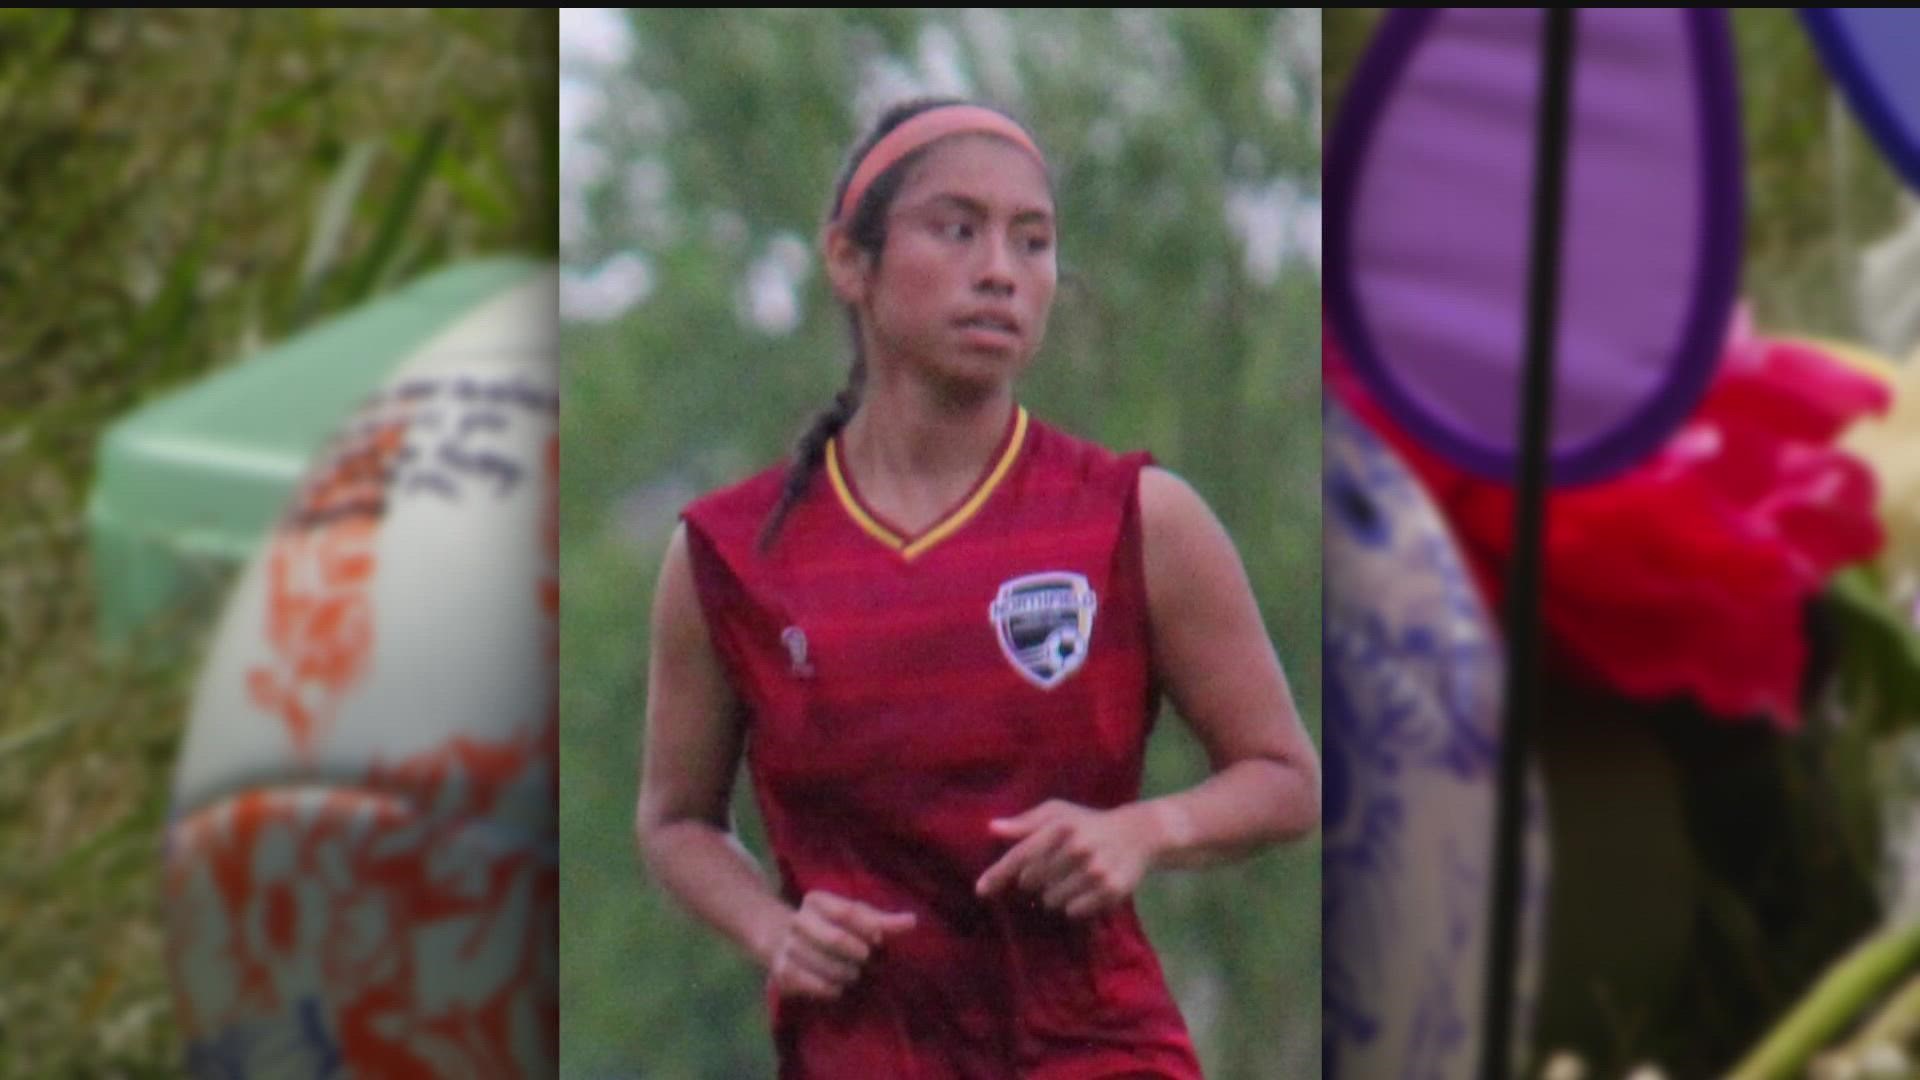 Family and friends gathered to remember 14-year-old Melanie Valencia Monday after she was hit and killed by a car while biking to soccer practice last week.